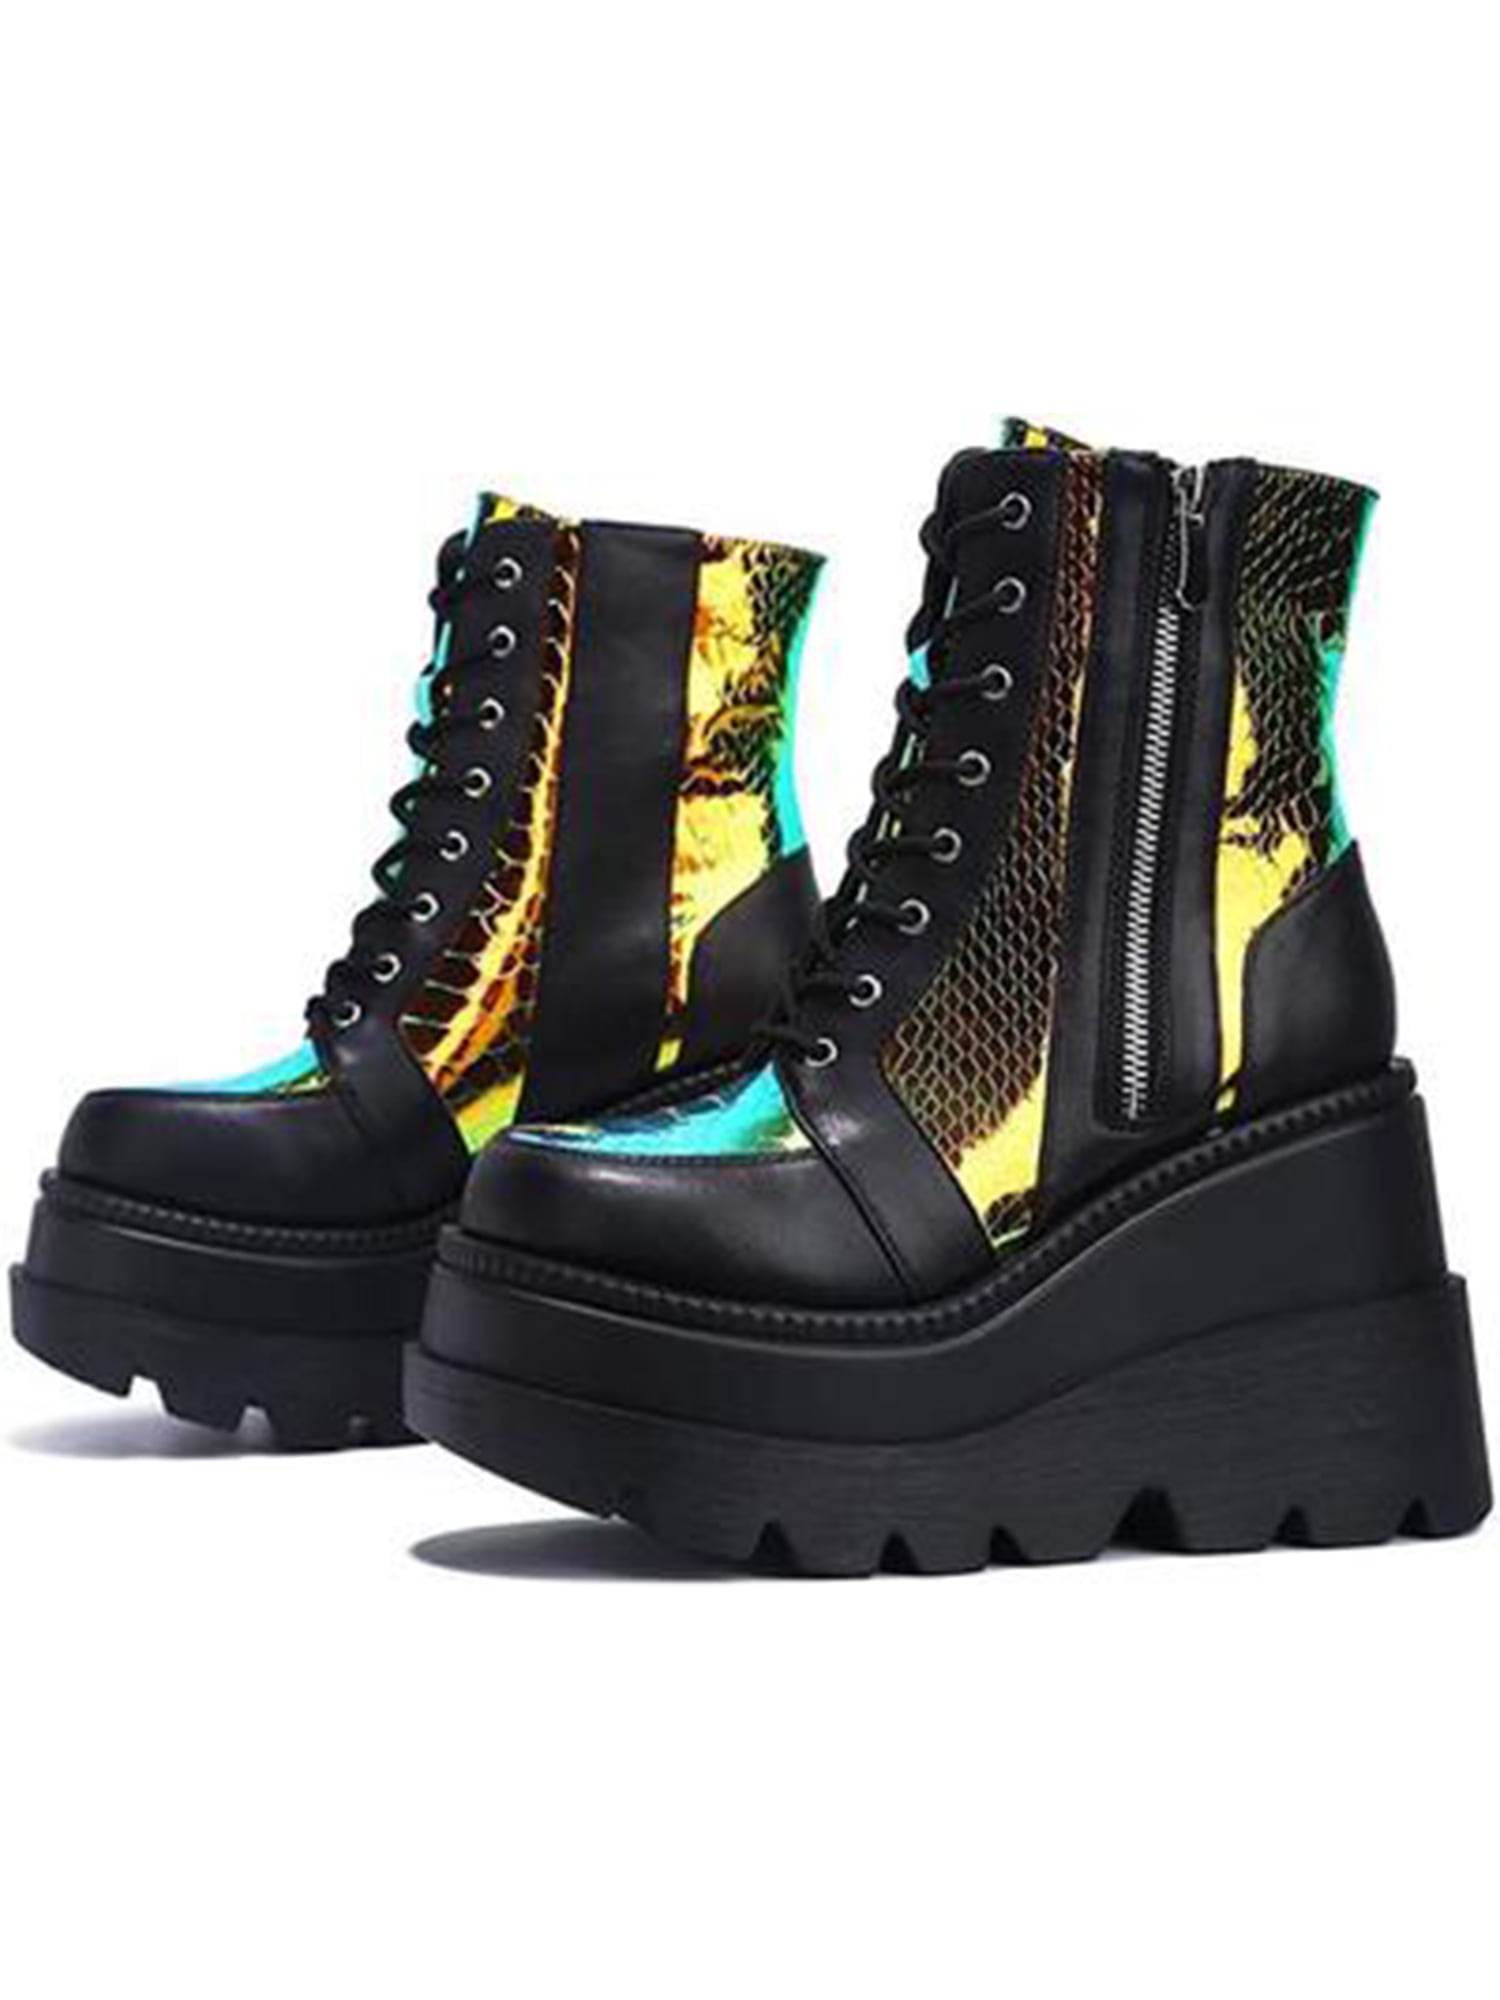 Details about   New Women British Ankle Boots Lace Up Platform Block Heel Casual Shoes Outdoor D 